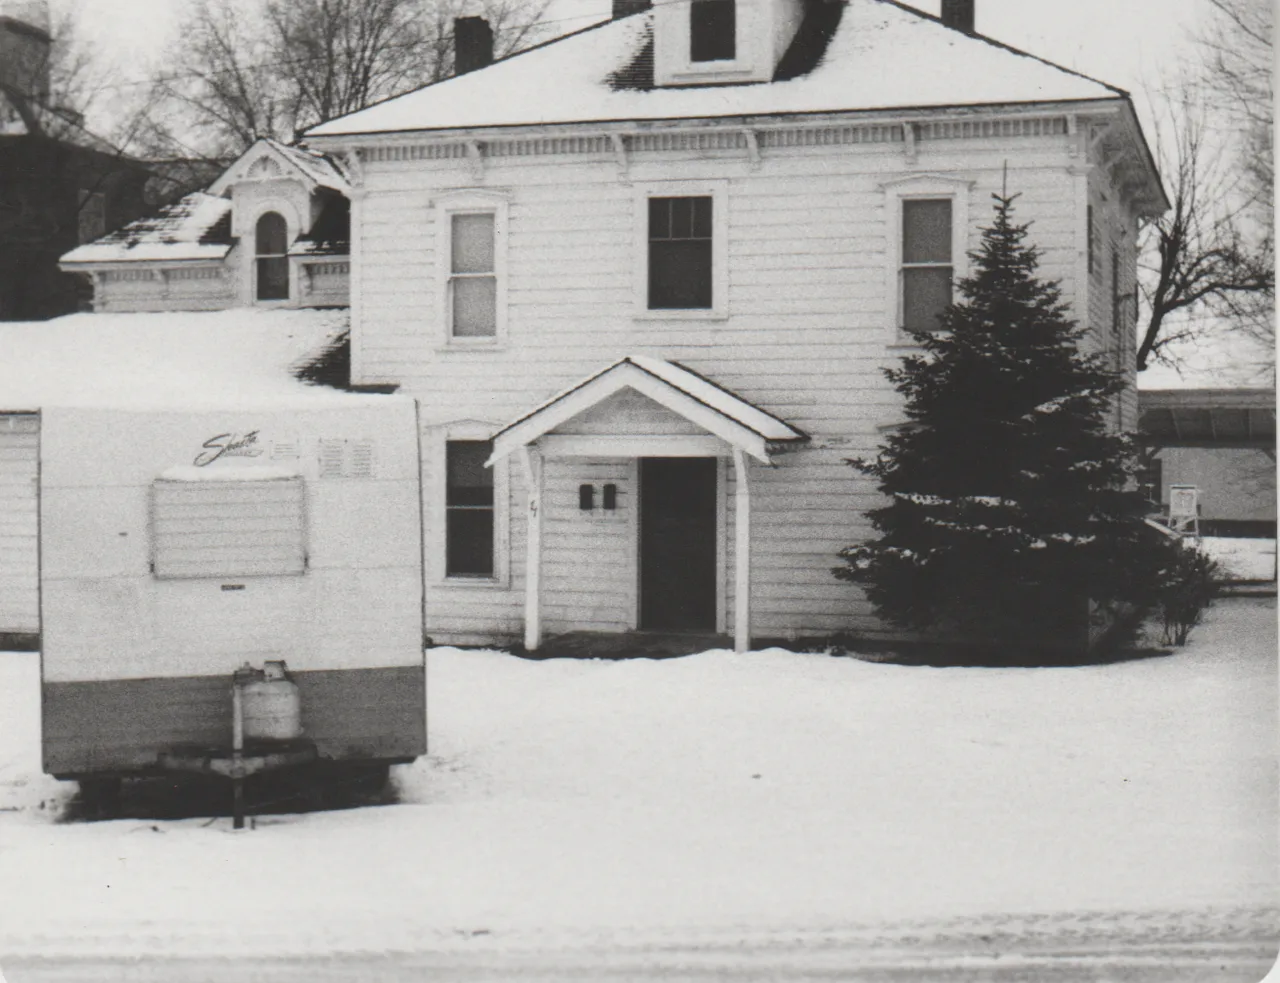 1975-02-08 - Saturday - Snow around a trailer and a house, 1pic ok.png